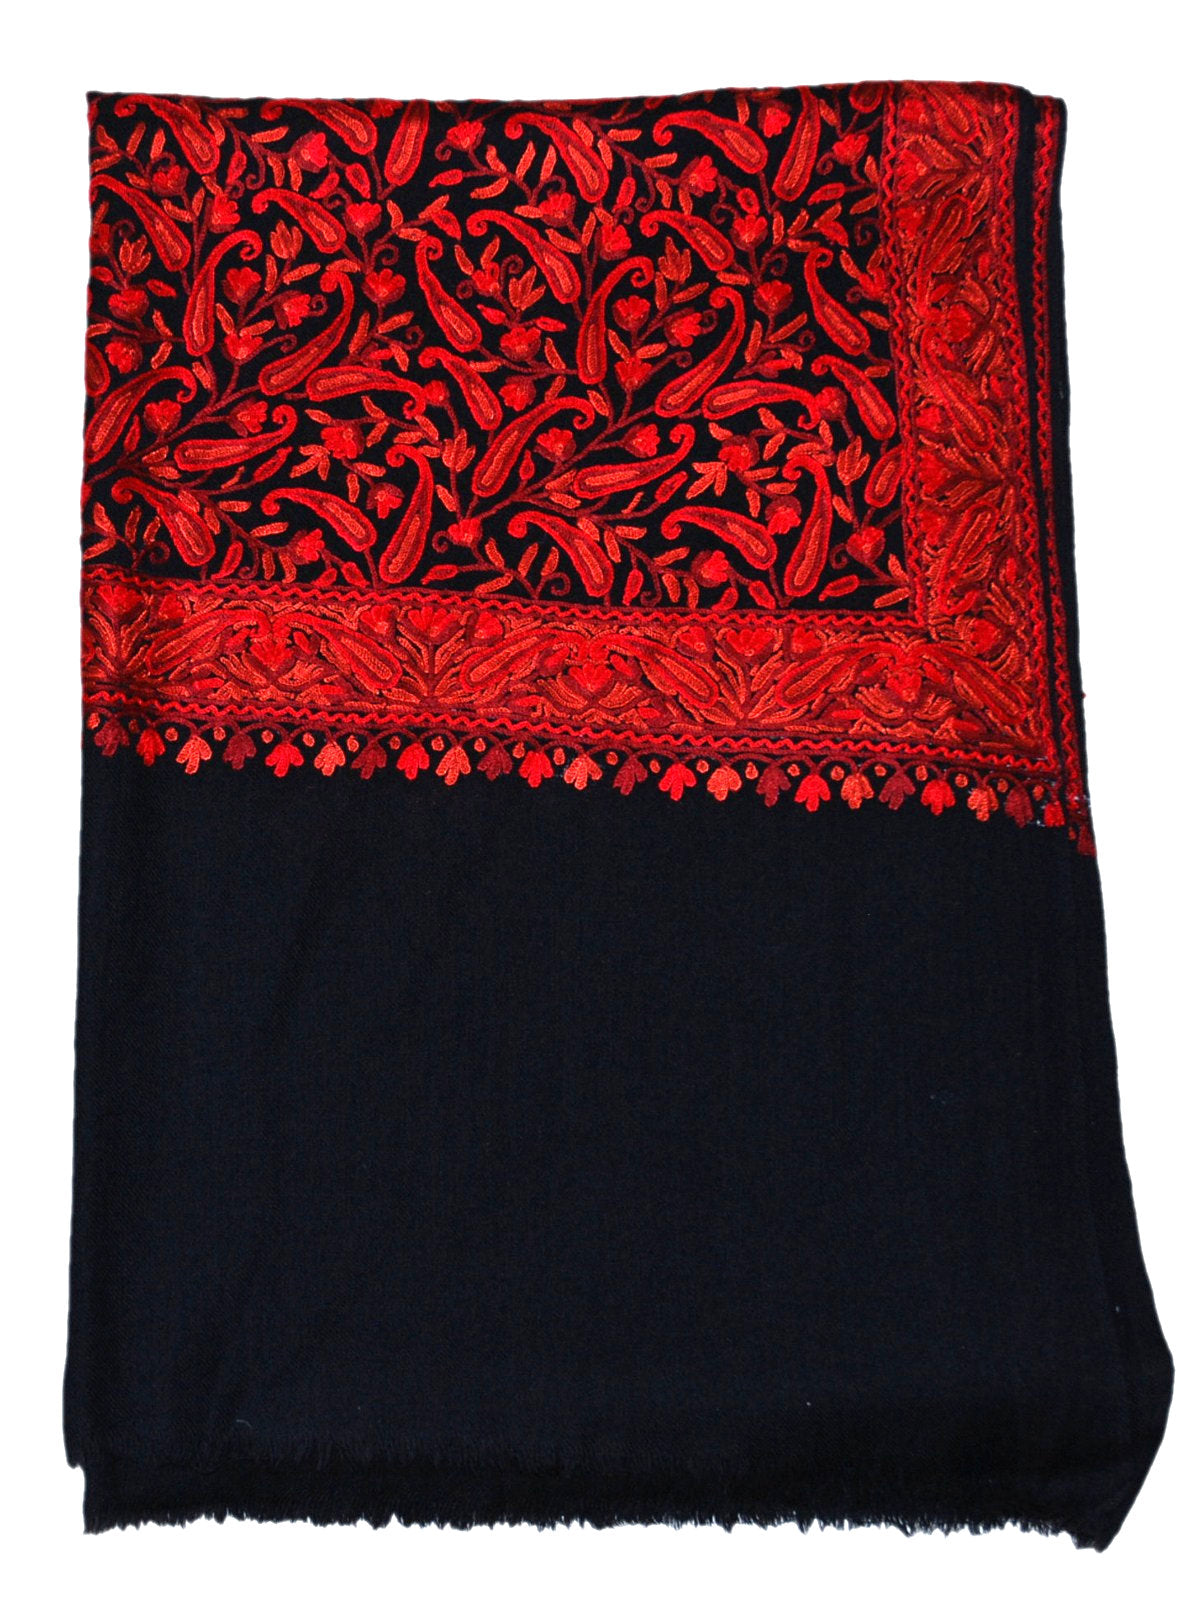 Hand Embroidered Woolen Shawl Wrap Throw Black, Red Embroidery #WS-125